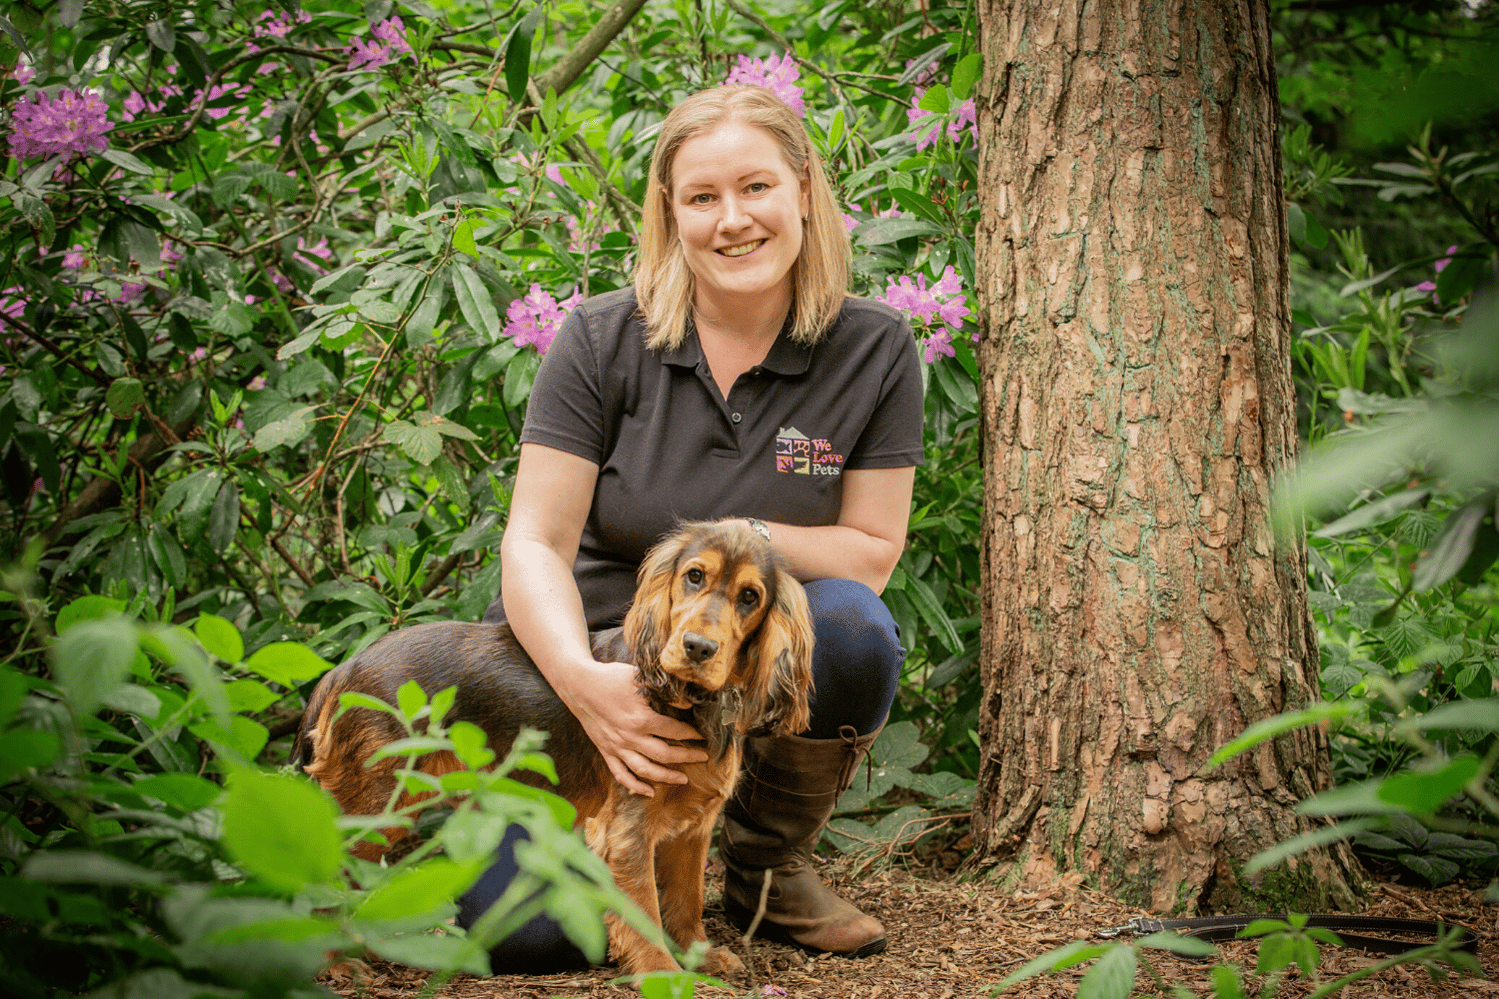 Dog walker and pet sitter in Solihull. Your pet is in safe hands with We Love Pets.